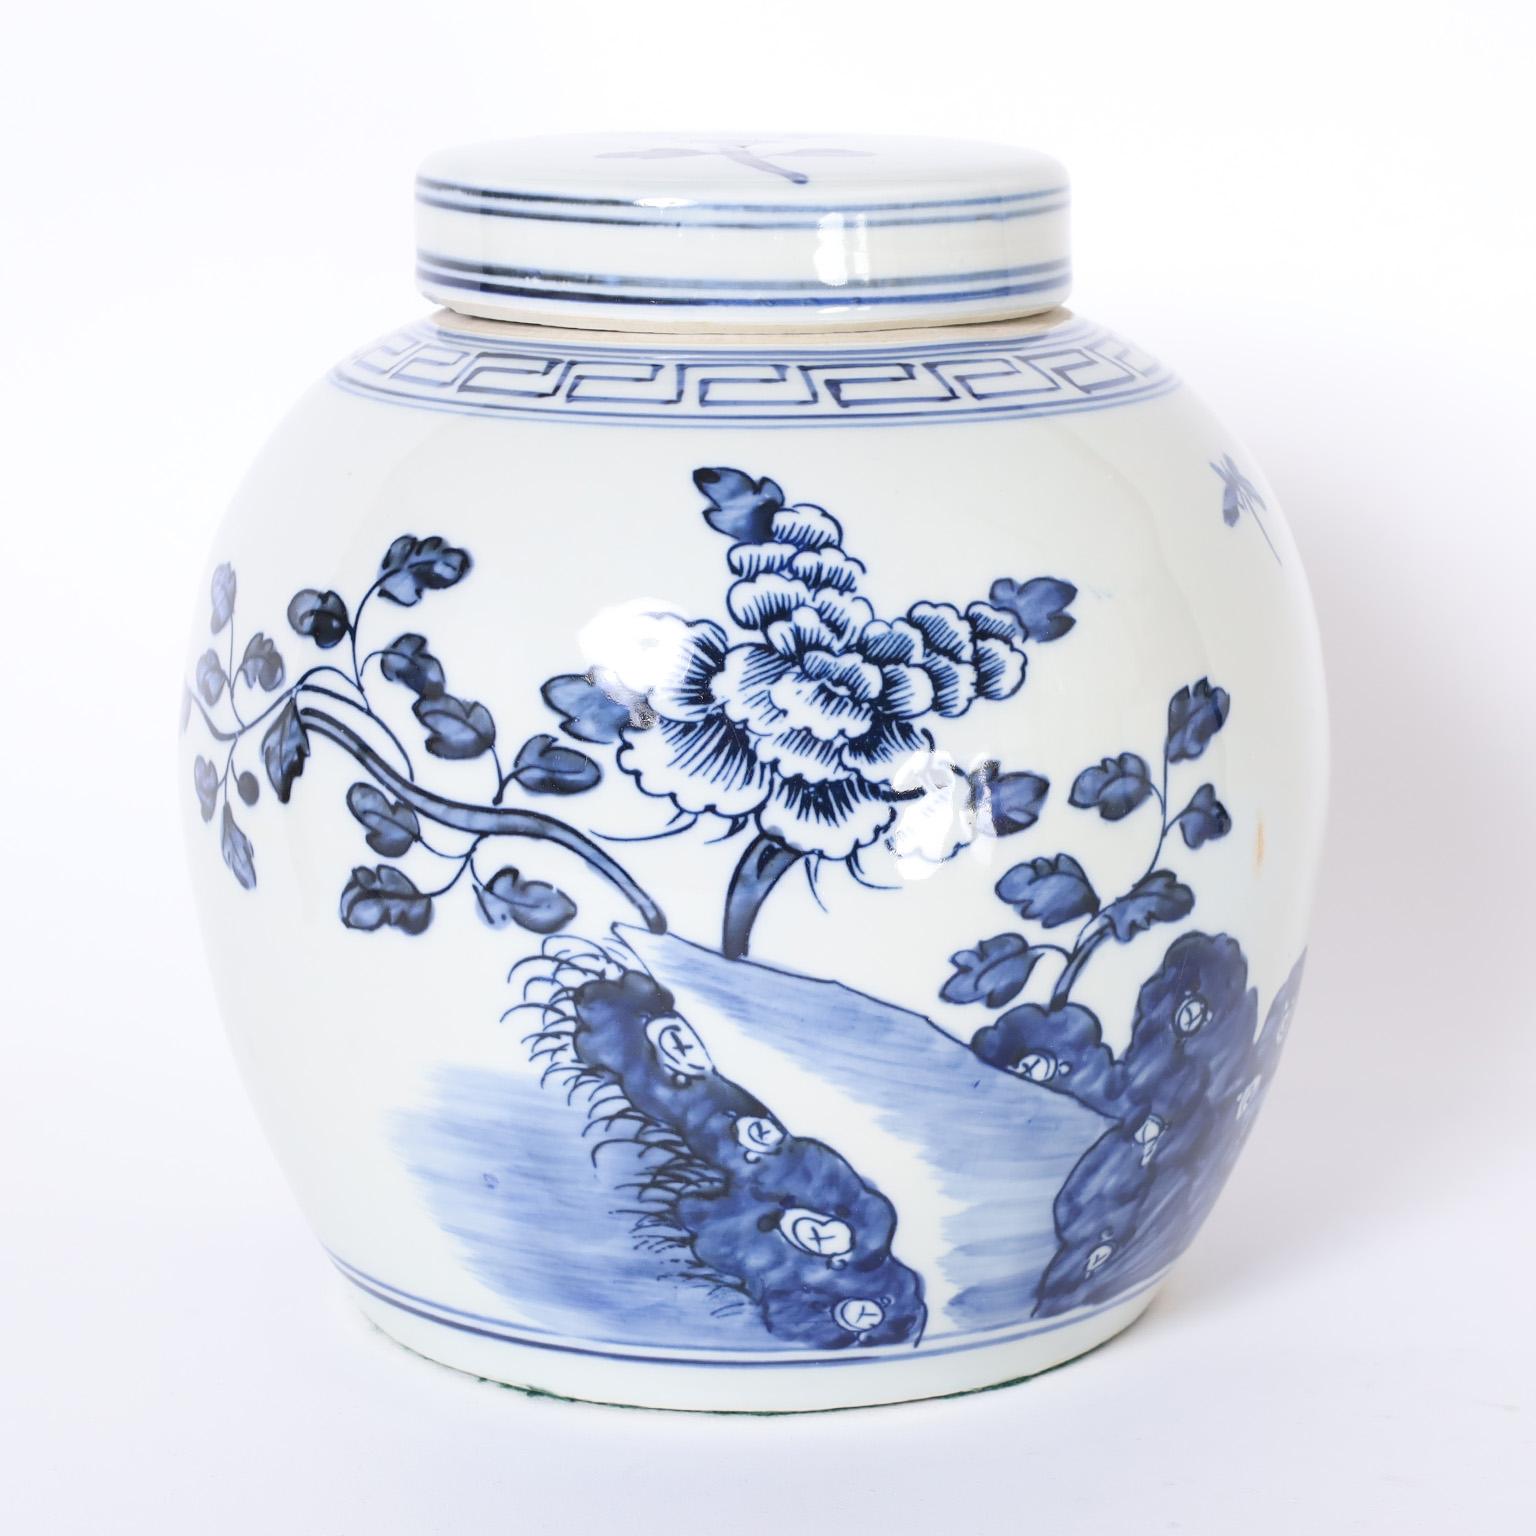 Glazed Pair of Blue and White Porcelain Lidded Jars with Flowers